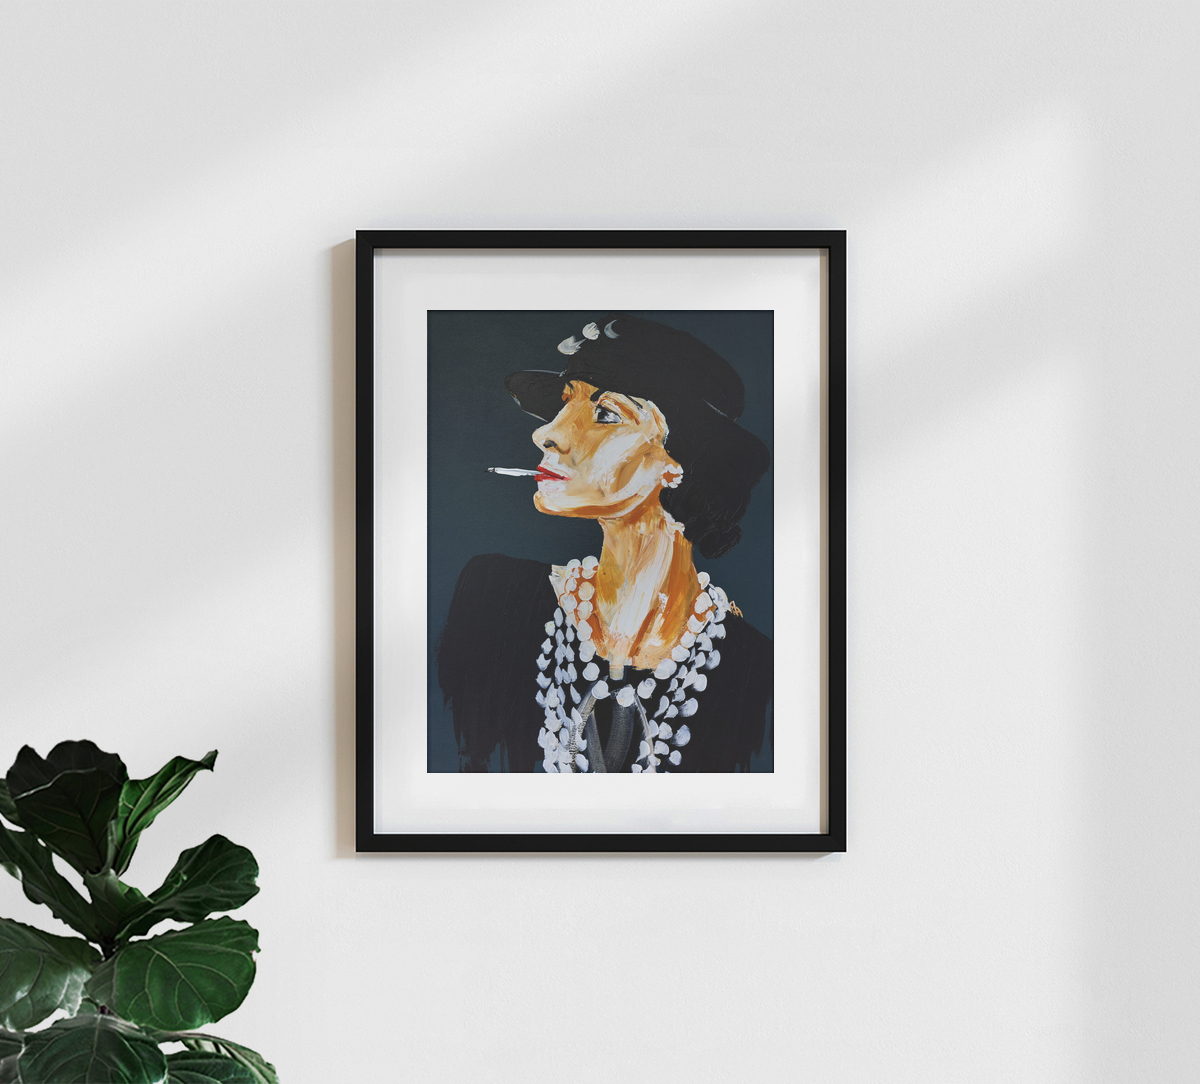 Coco Chanel Wall Art  Paintings, Drawings & Photograph Art Prints